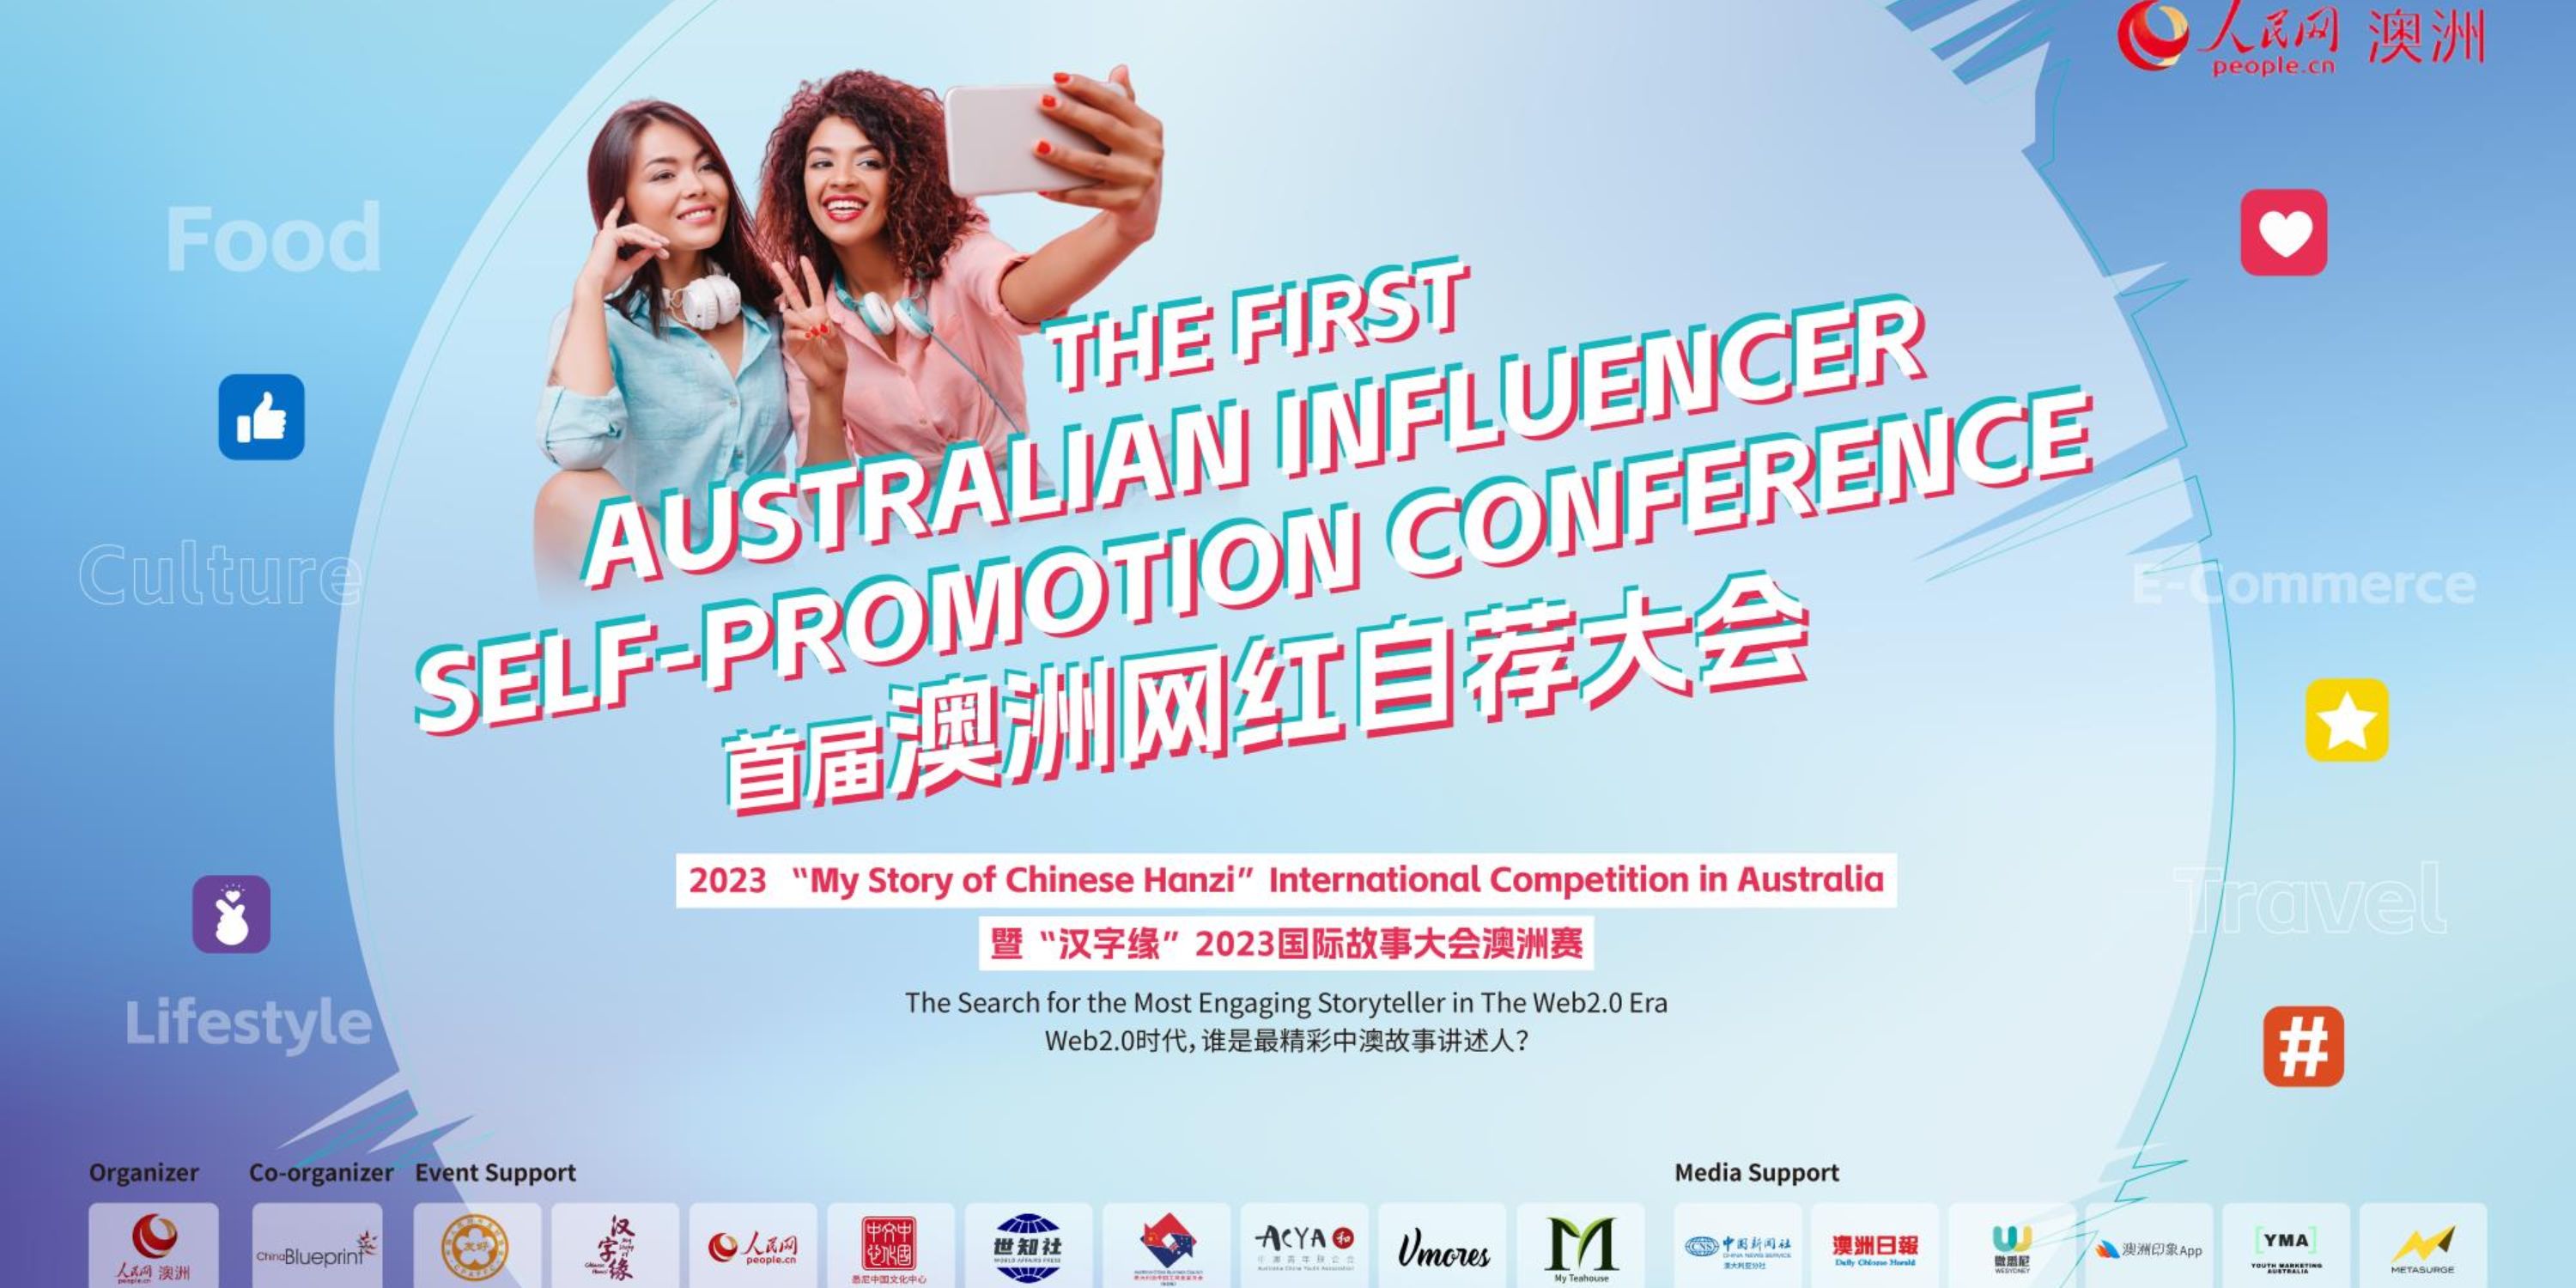  The first Australian online celebrity self recommendation conference The first Australian online celebrity self promotion conference gathered more than 30 local well-known online celebrity bloggers to discover wonderful Chinese and Australian story tellers and build an Australian online celebrity into the Chinese market. 